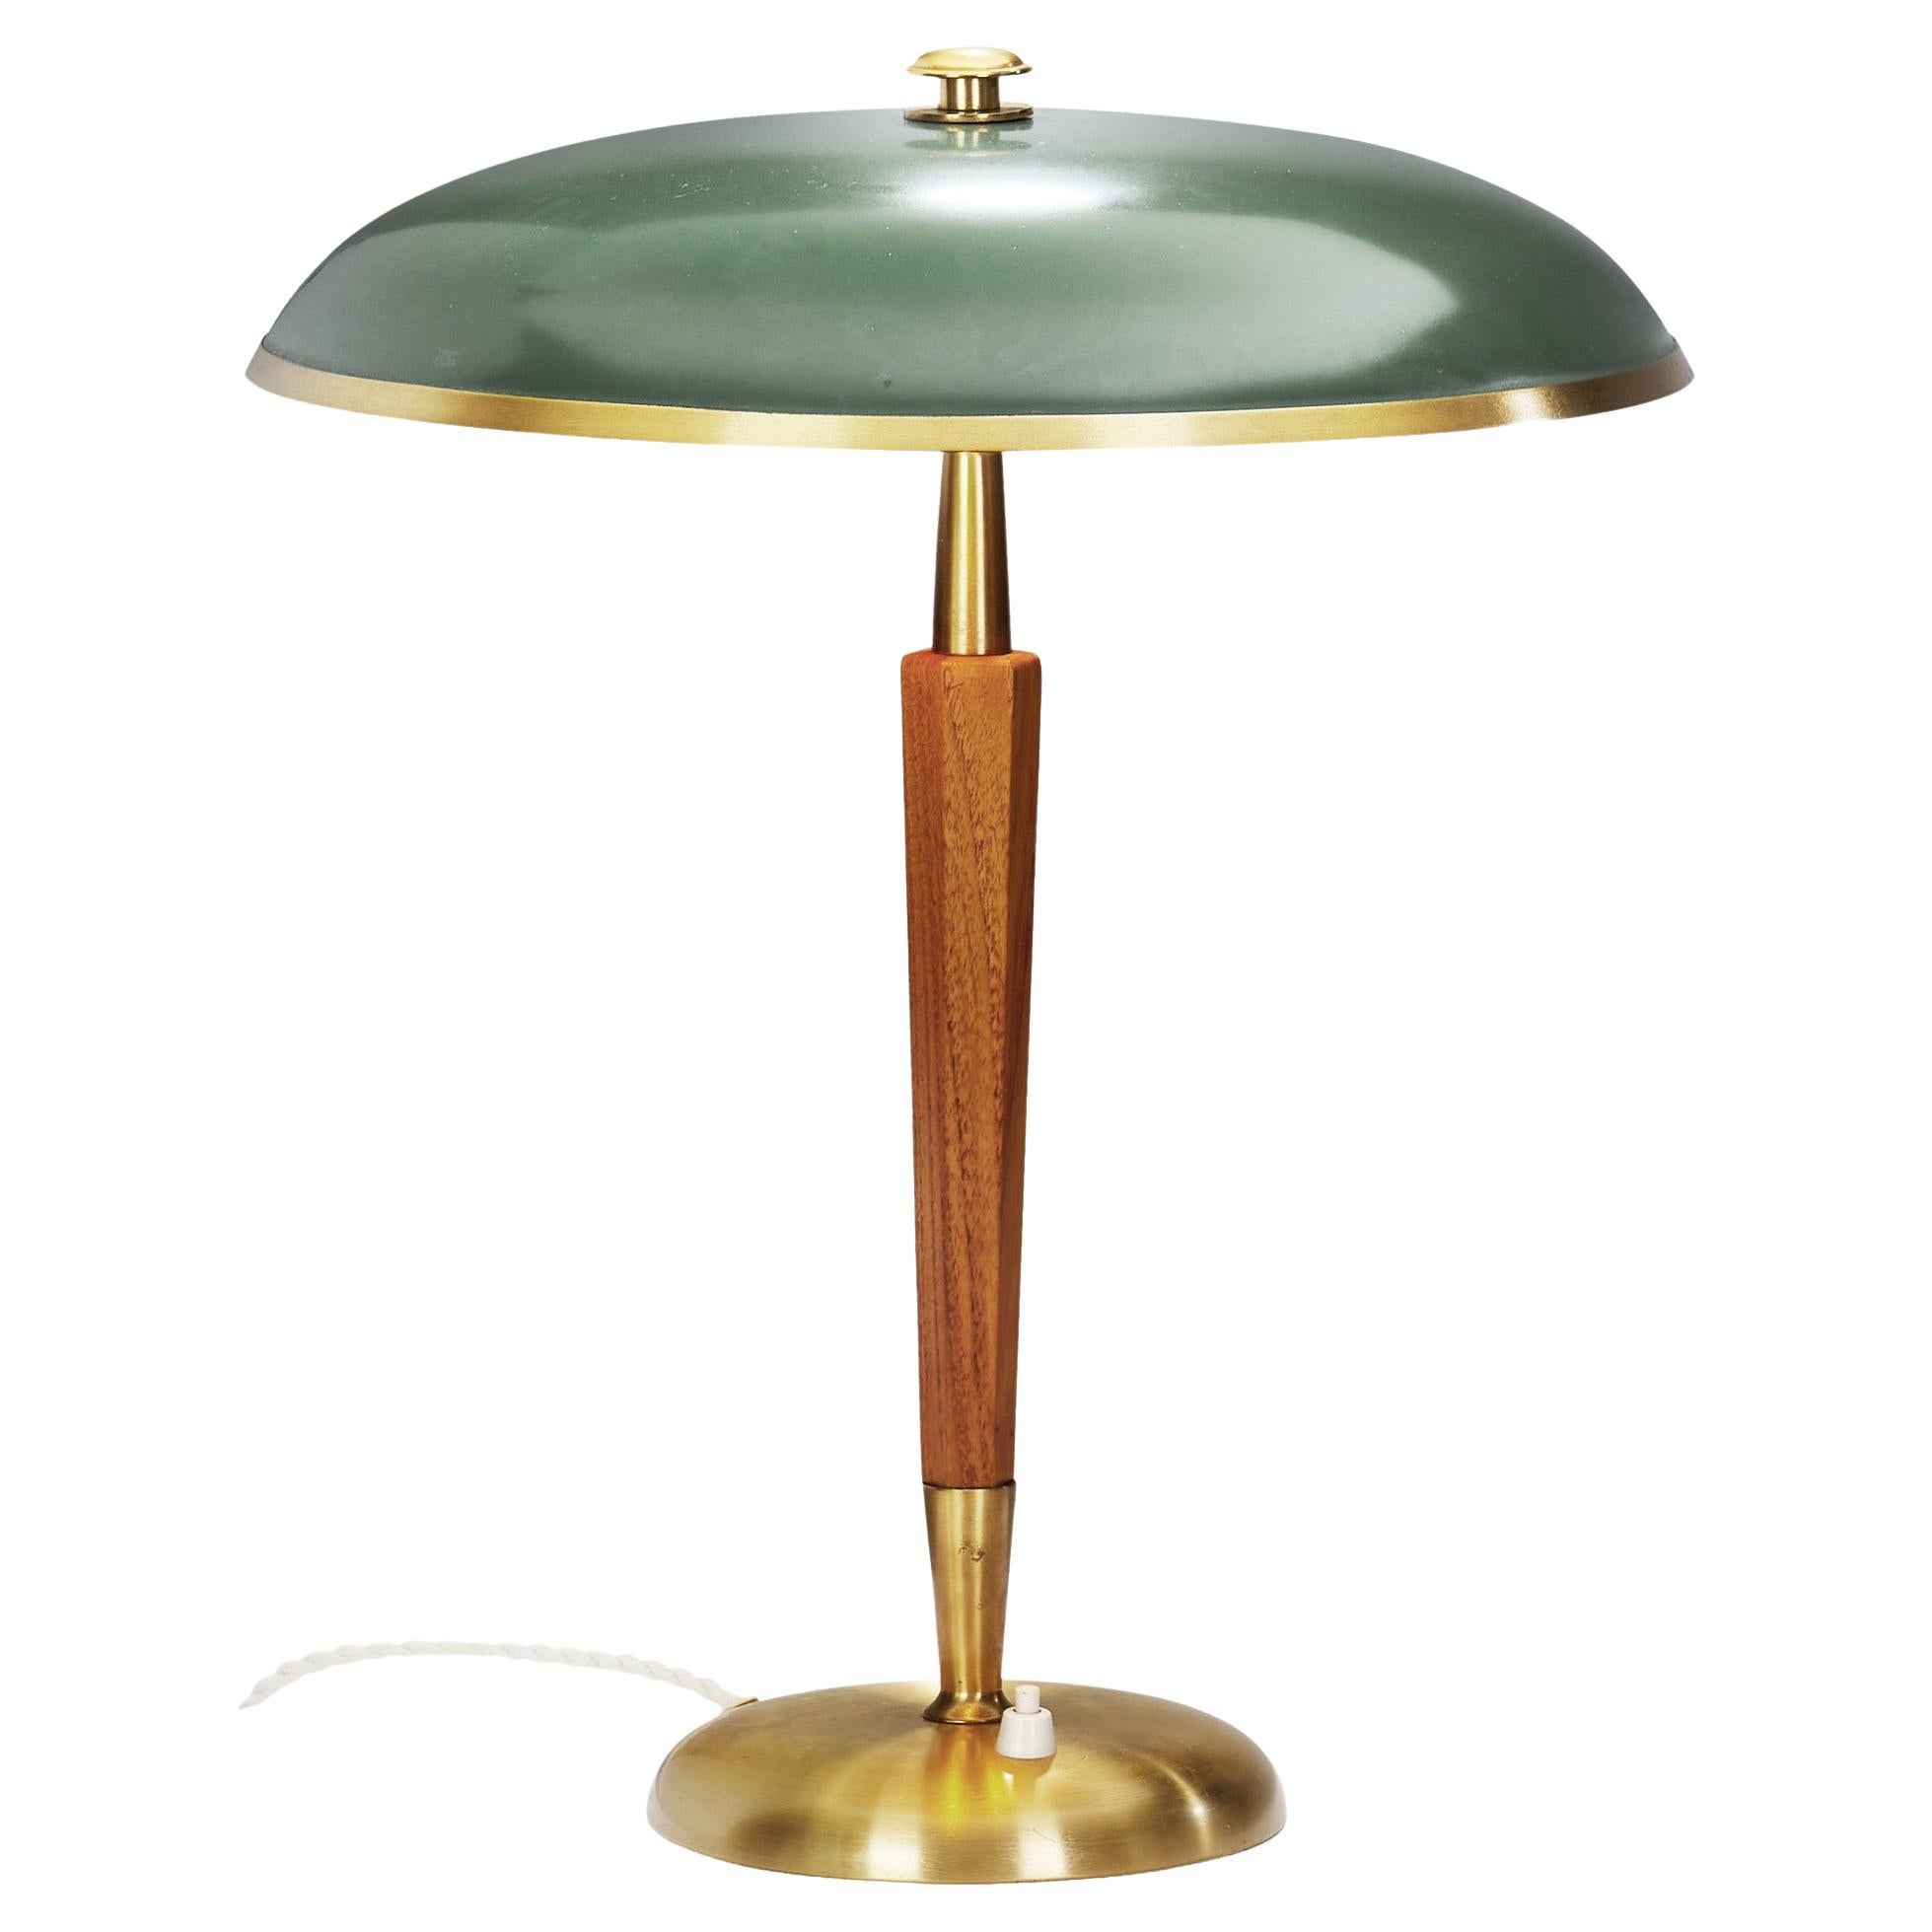 Brass and Wood Model "B8453" Table Lamp by Boréns, Borås, Sweden 1950s